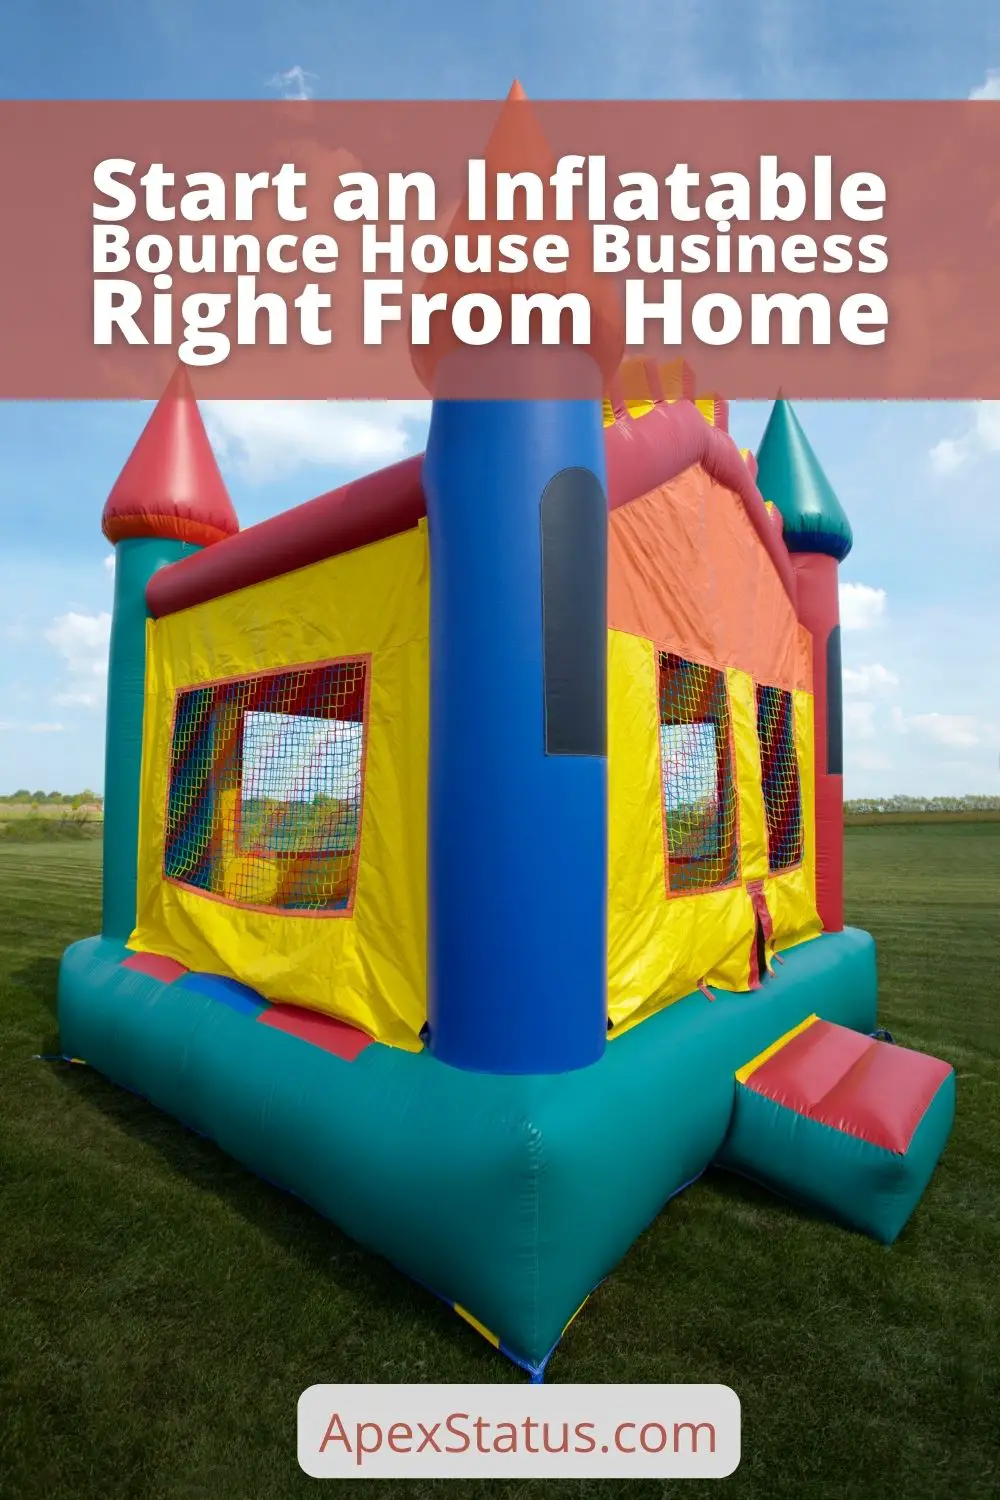 Start an Inflatable Bounce House Business Right From Home